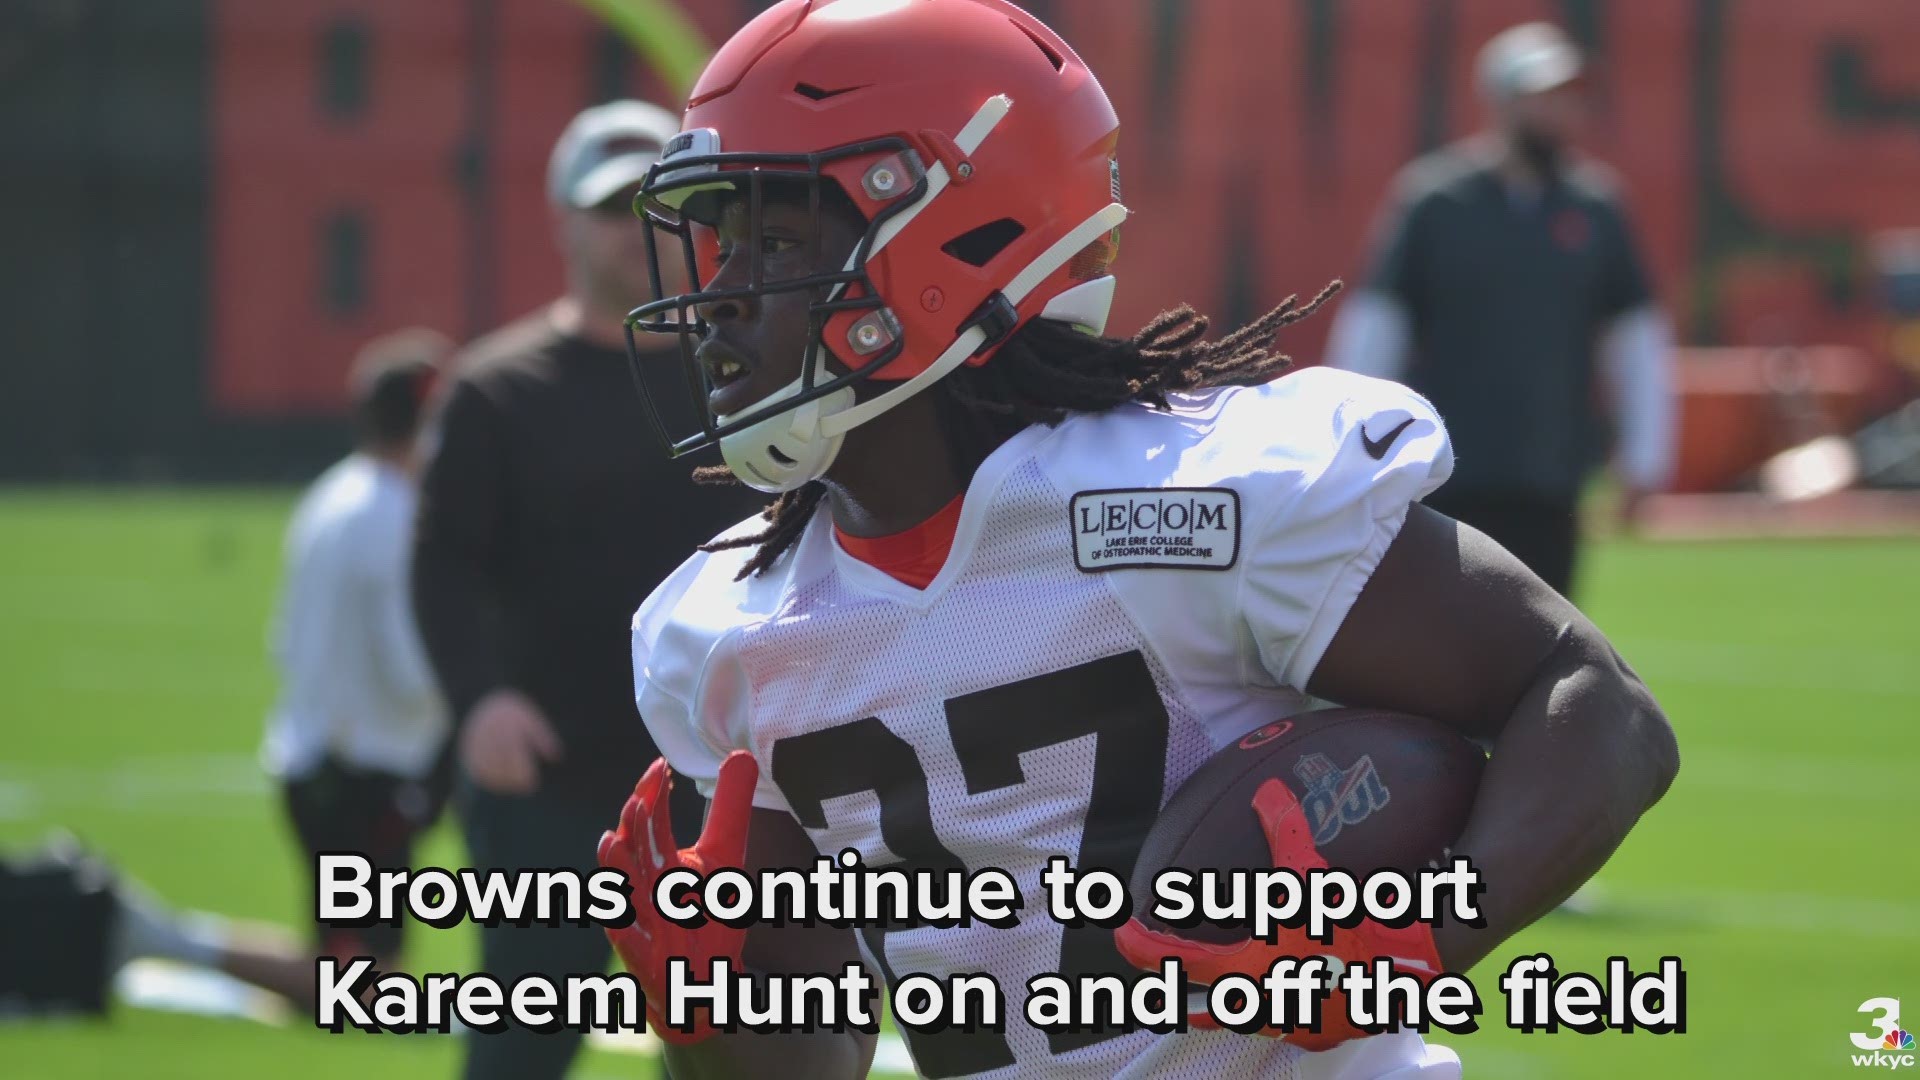 Coach Freddie Kitchens said he and GM John Dorsey attended Kareem Hunt's baptism Sunday to show him that the Cleveland Browns care about the person, not just the player.